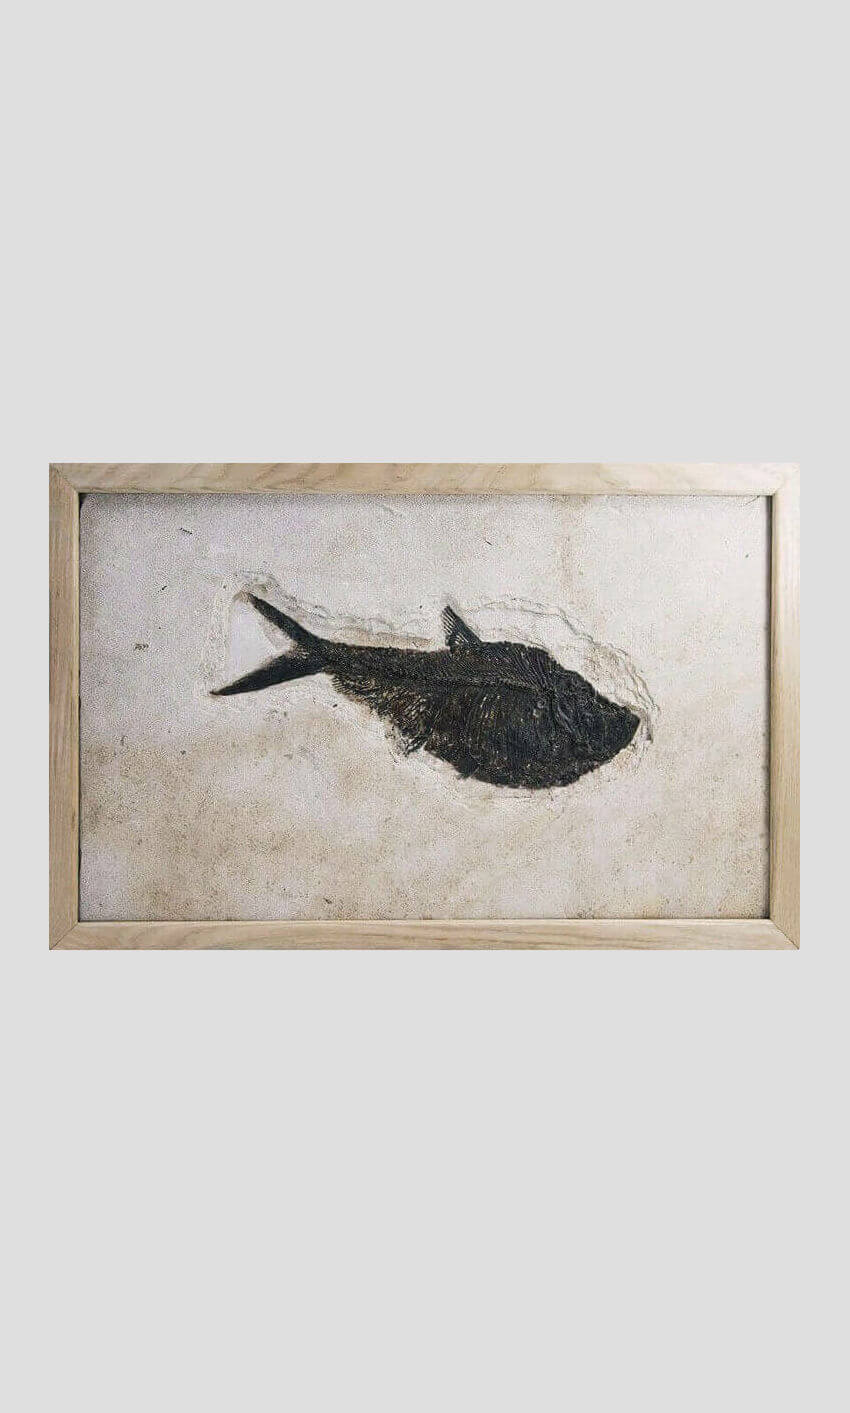 large fossil Diplomystus fish in a wood frame 1